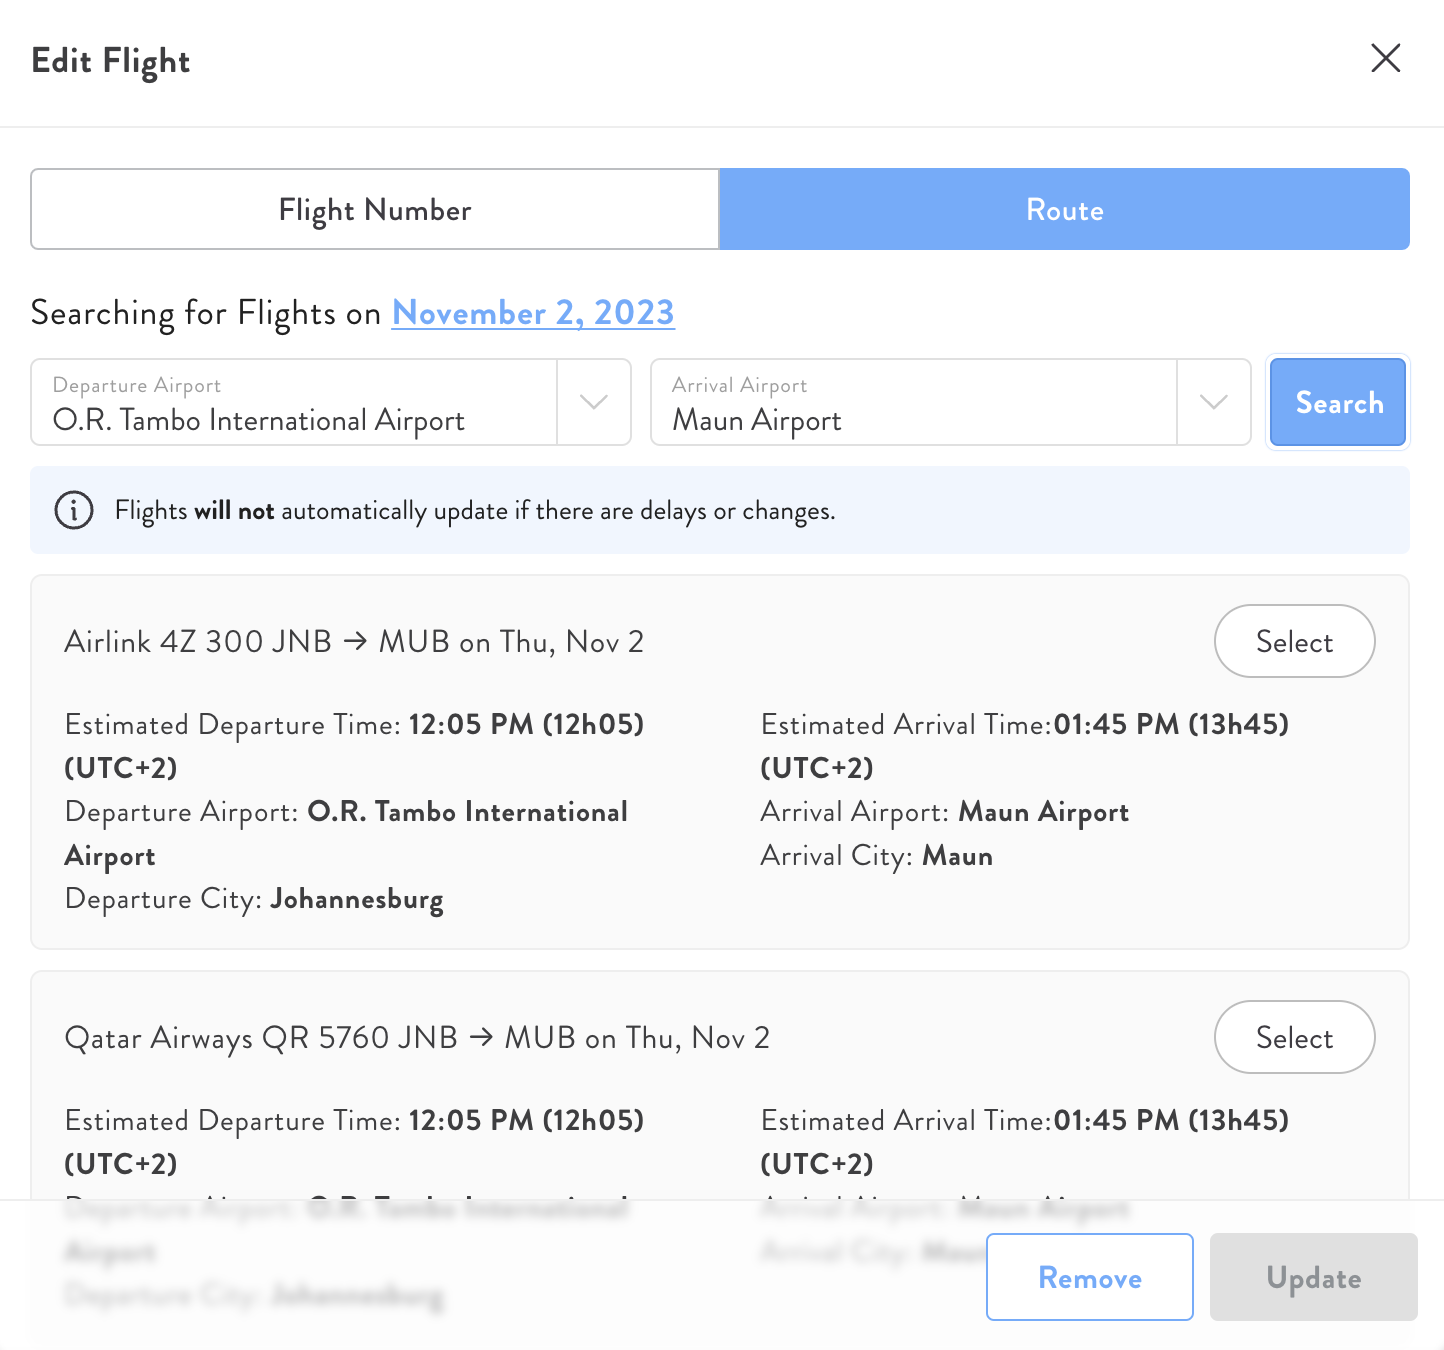 Save time with automated flight search via API